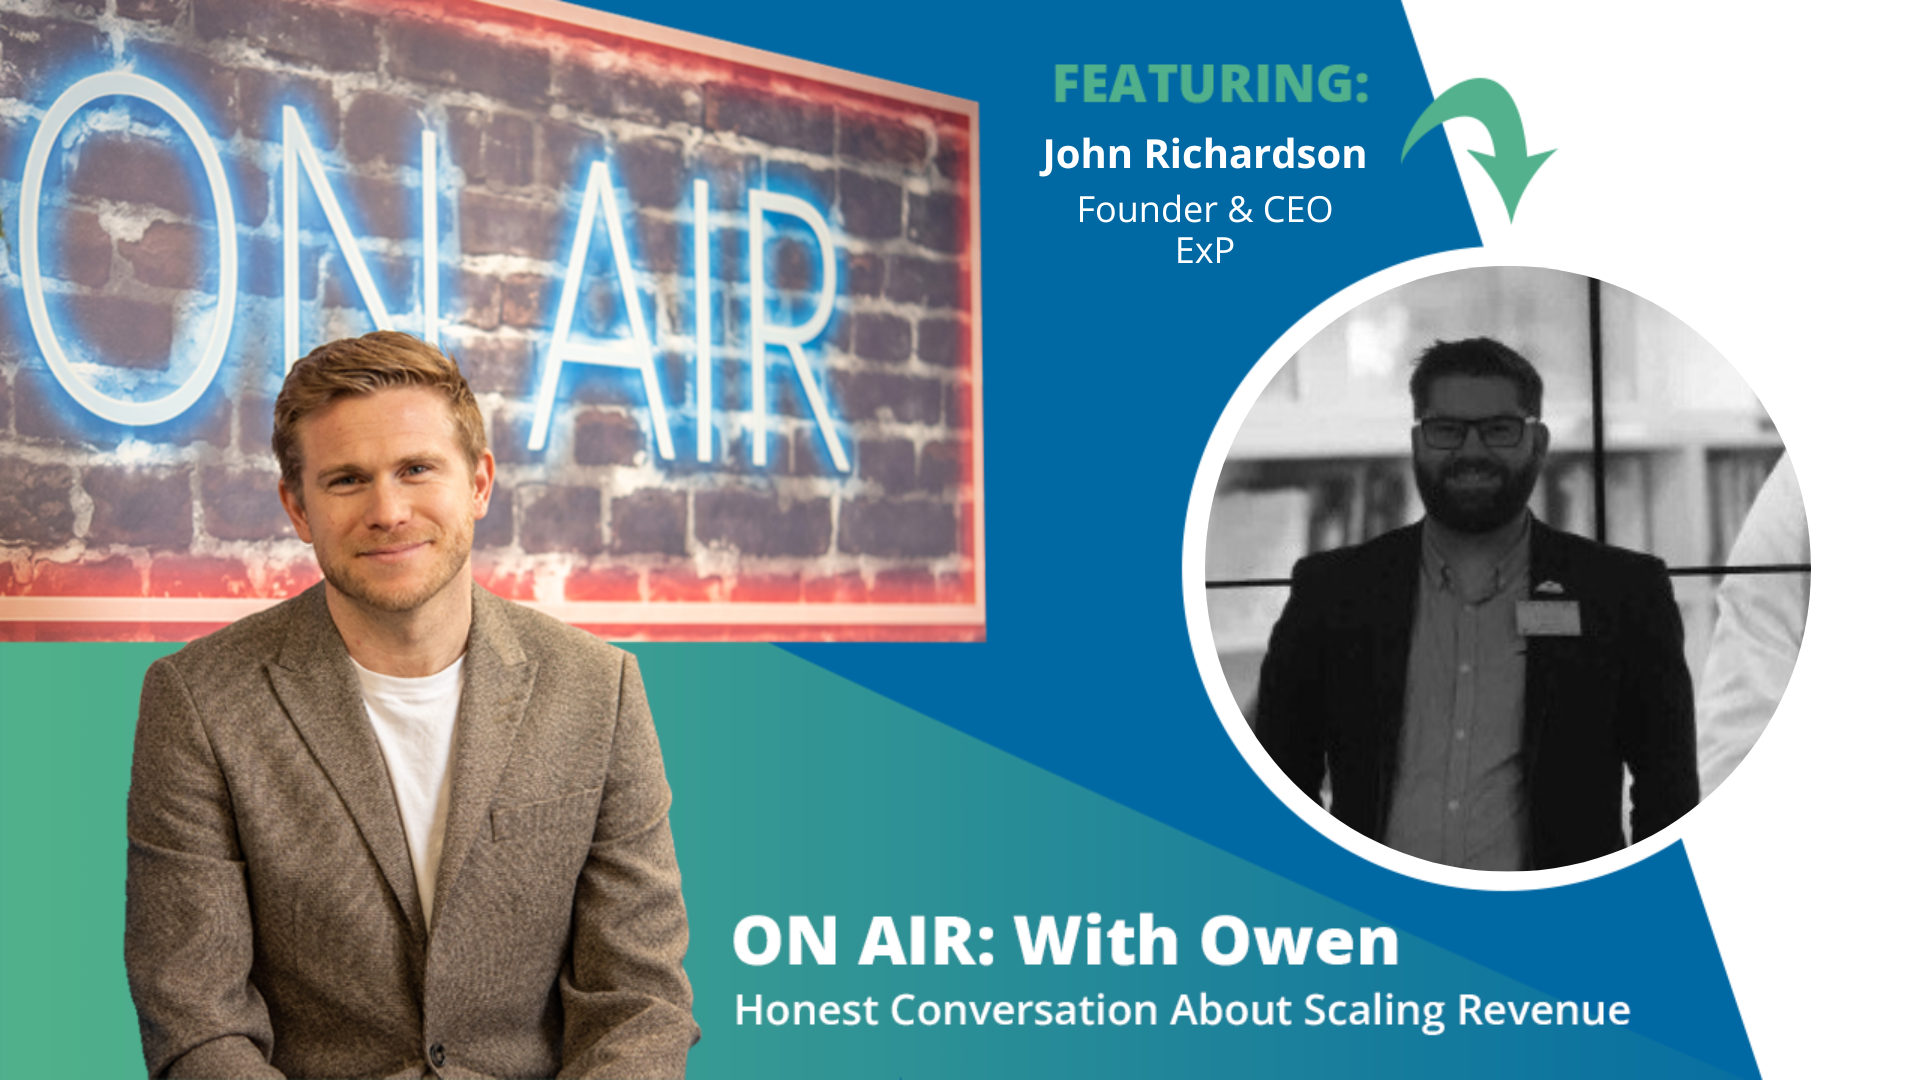 ON AIR: With Owen Episode 70 Featuring John Richardson – Founder & CEO, ExP